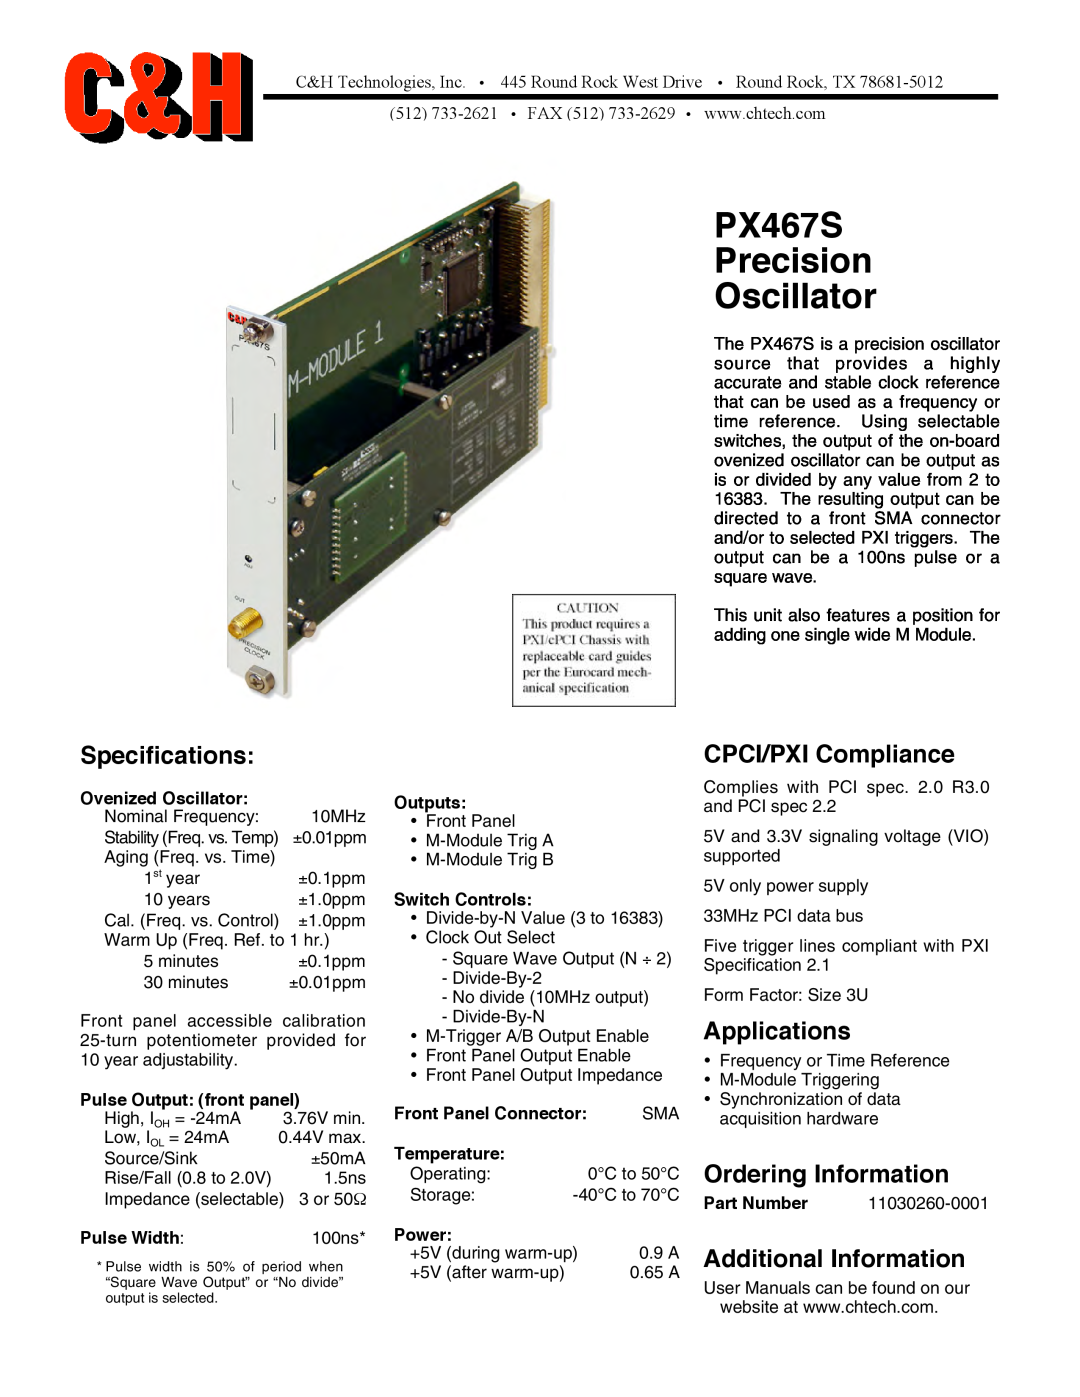 CH Tech specifications PX467S Precision Oscillator, Specifications, CPCI/PXI Compliance, Applications, Pulse Width 